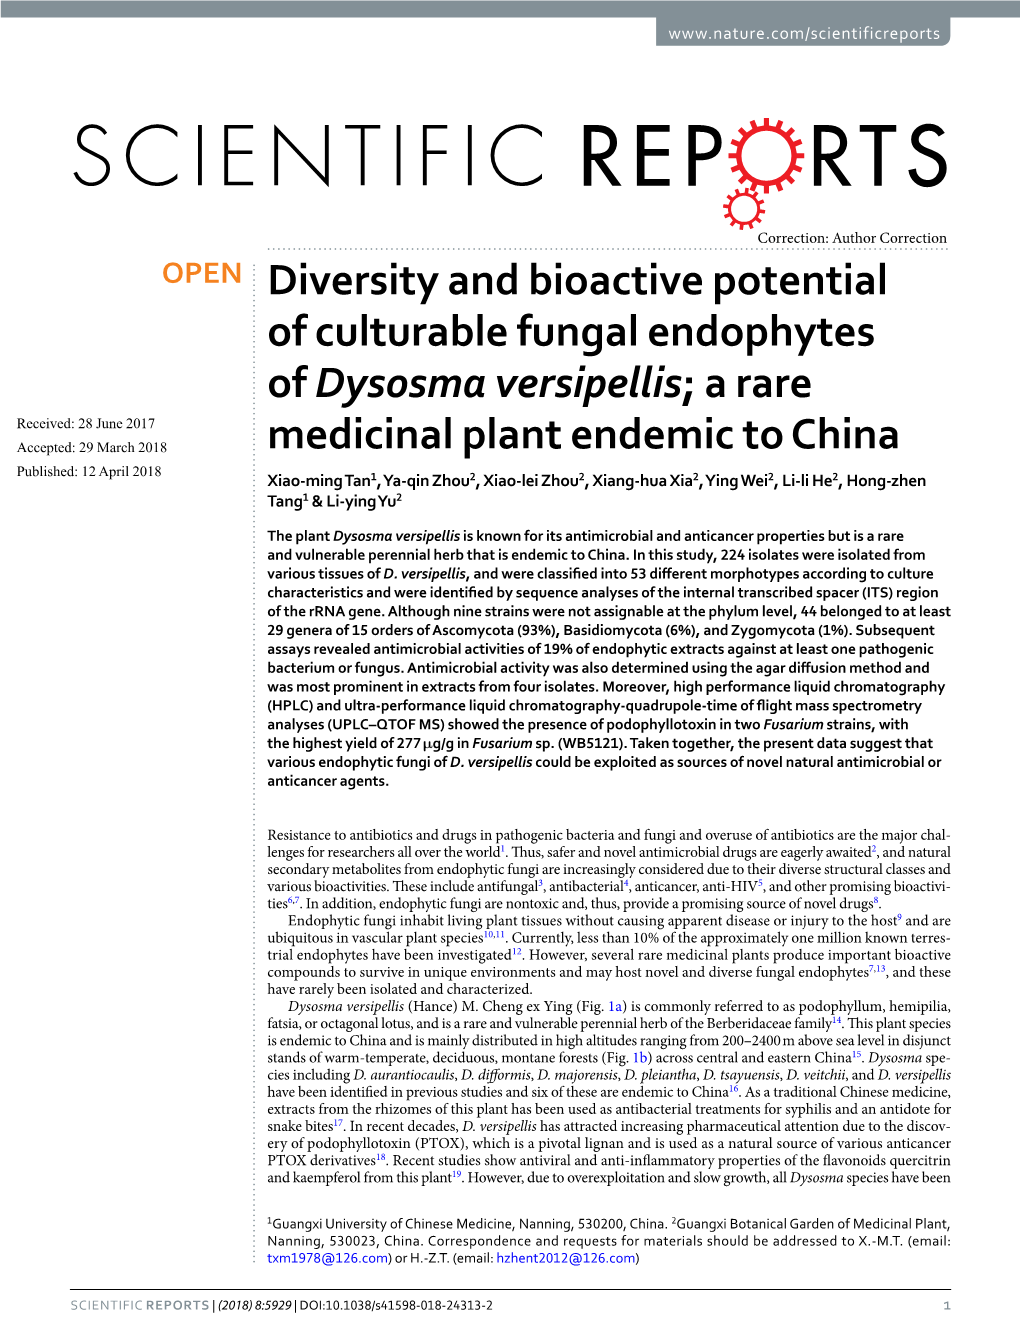 Diversity and Bioactive Potential of Culturable Fungal